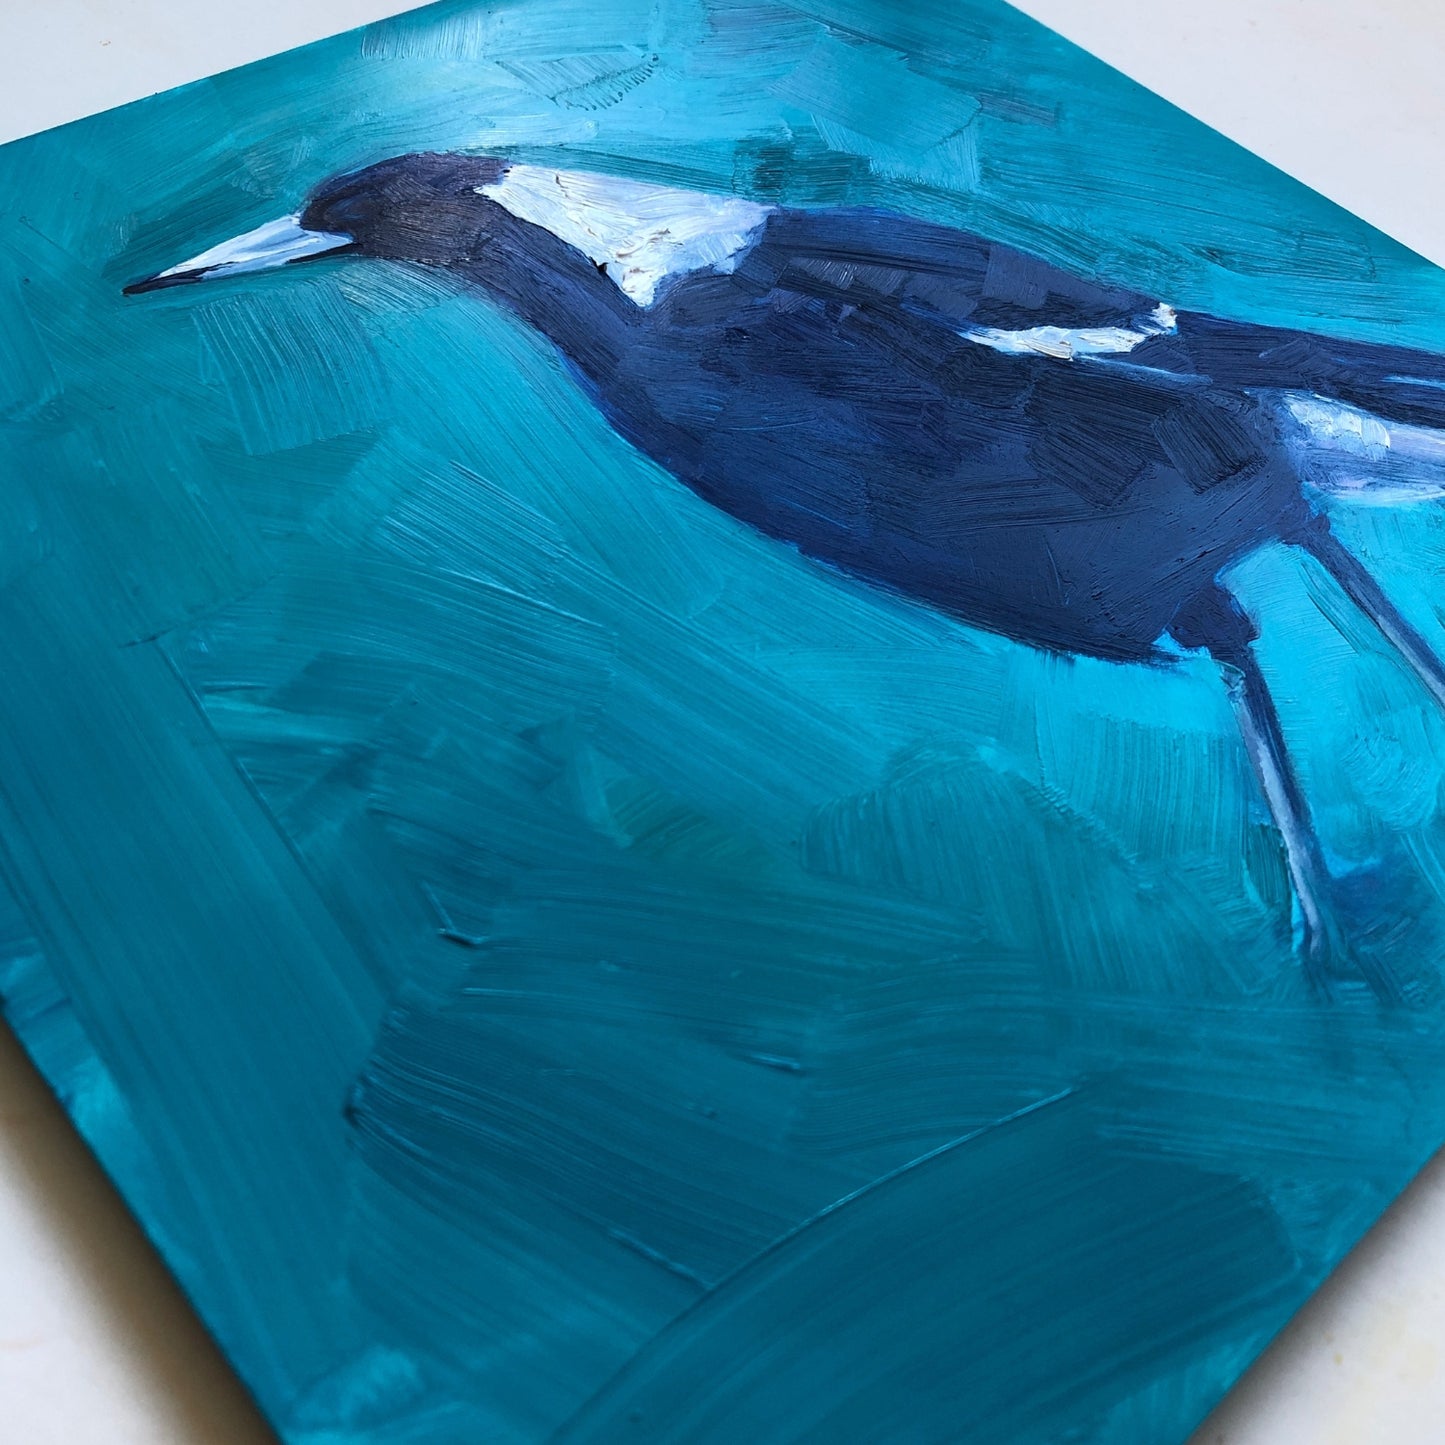 closeup photo of an original oil painting on board of a navy blue and white magpie on a textured turquoise background